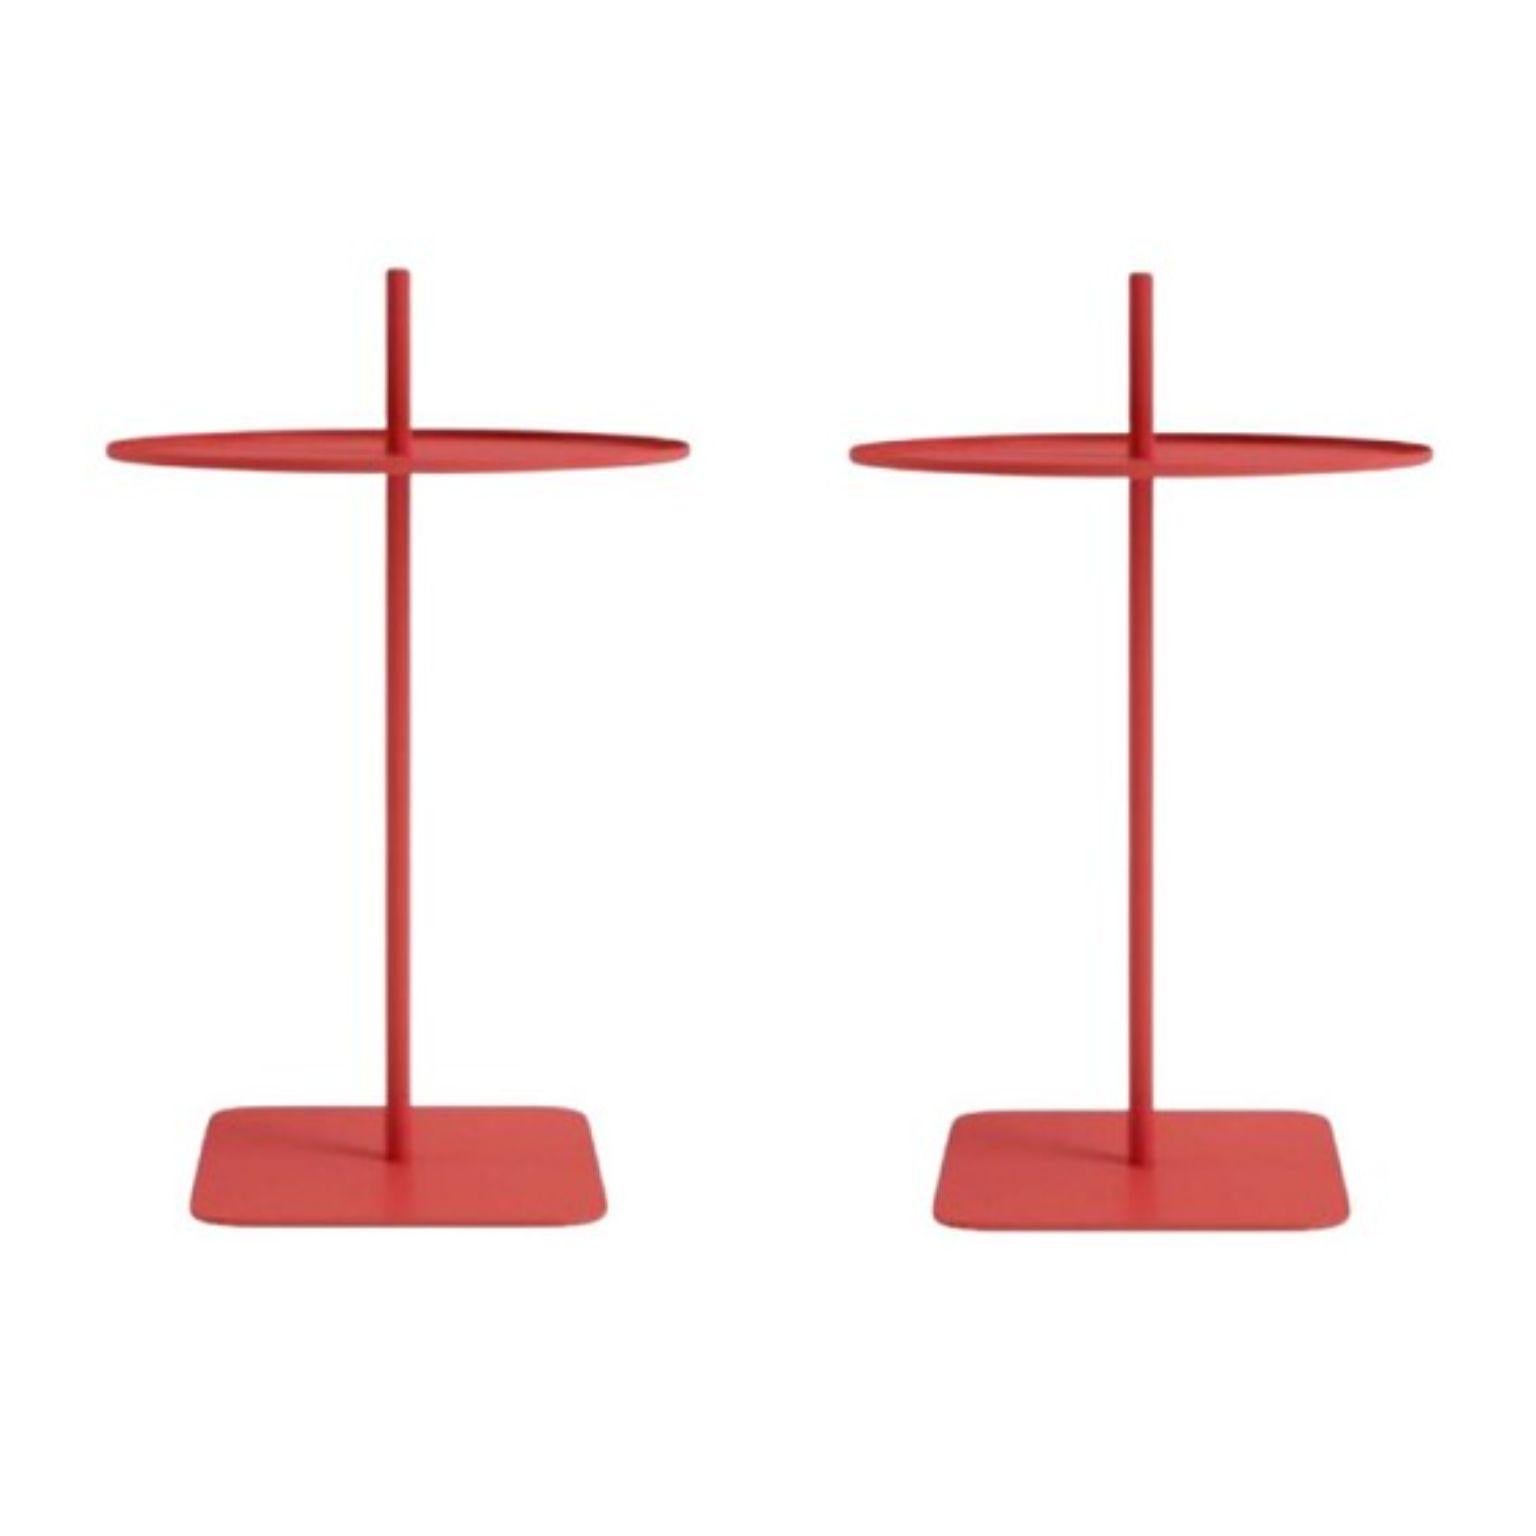 Set of 2 spin 01 red coffee tables by Oito
Dimensions: D41x W41 x H68 cm
Materials: Powder coated steel
Weight: 5 kg
Also Available in different colours.
Suitable for outdoor use.
Assembly design. Registered design.

The idea of ?a coffee